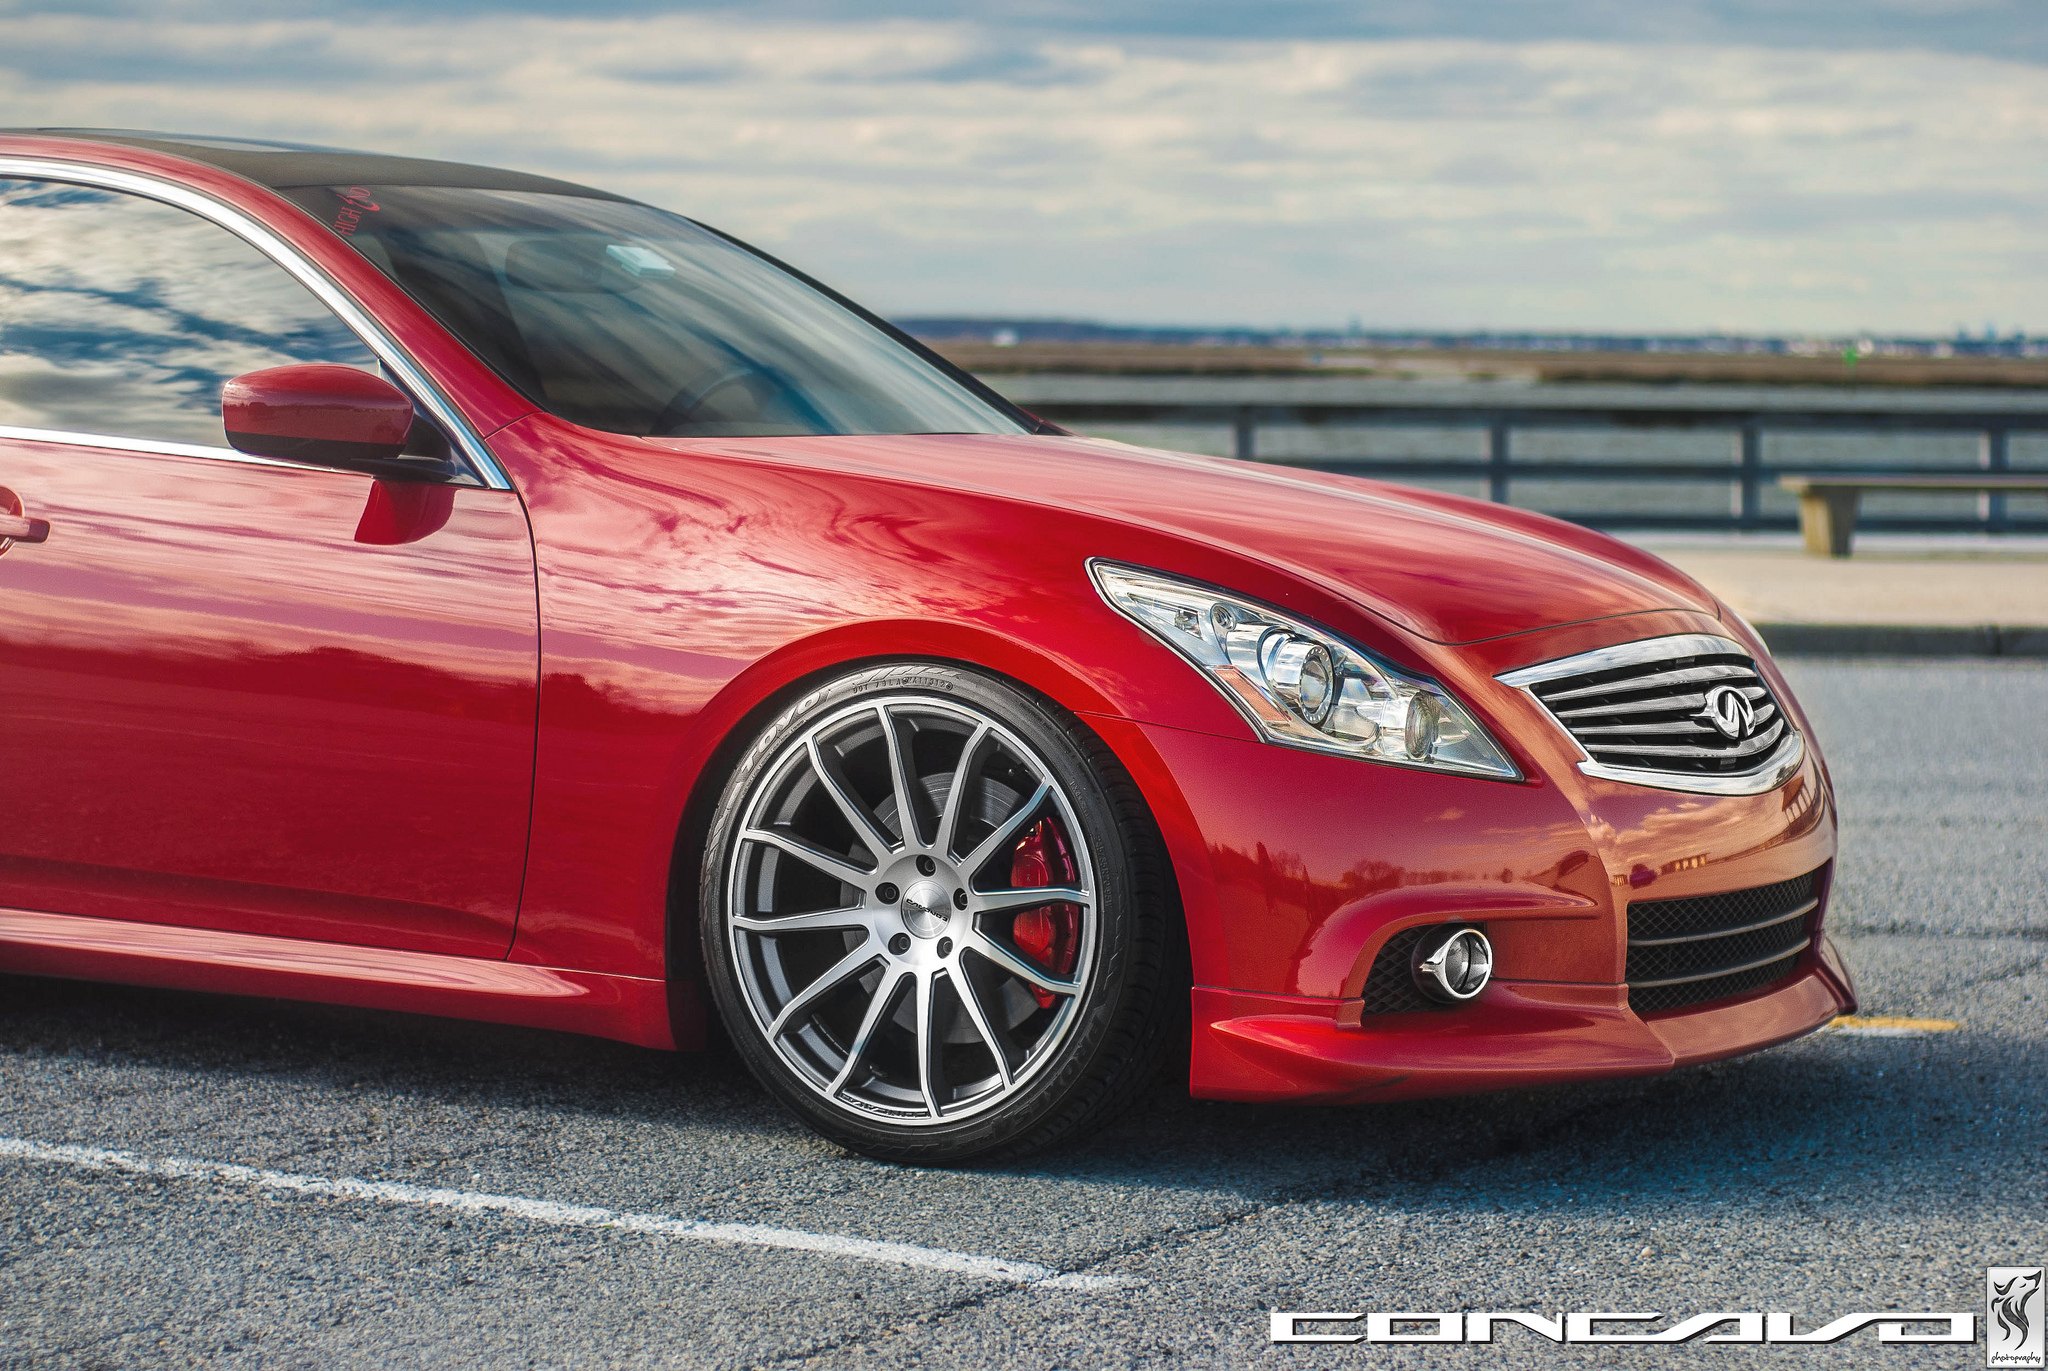 Chrome Concavo Wheels on Red Infiniti G37 - Photo by Vossen